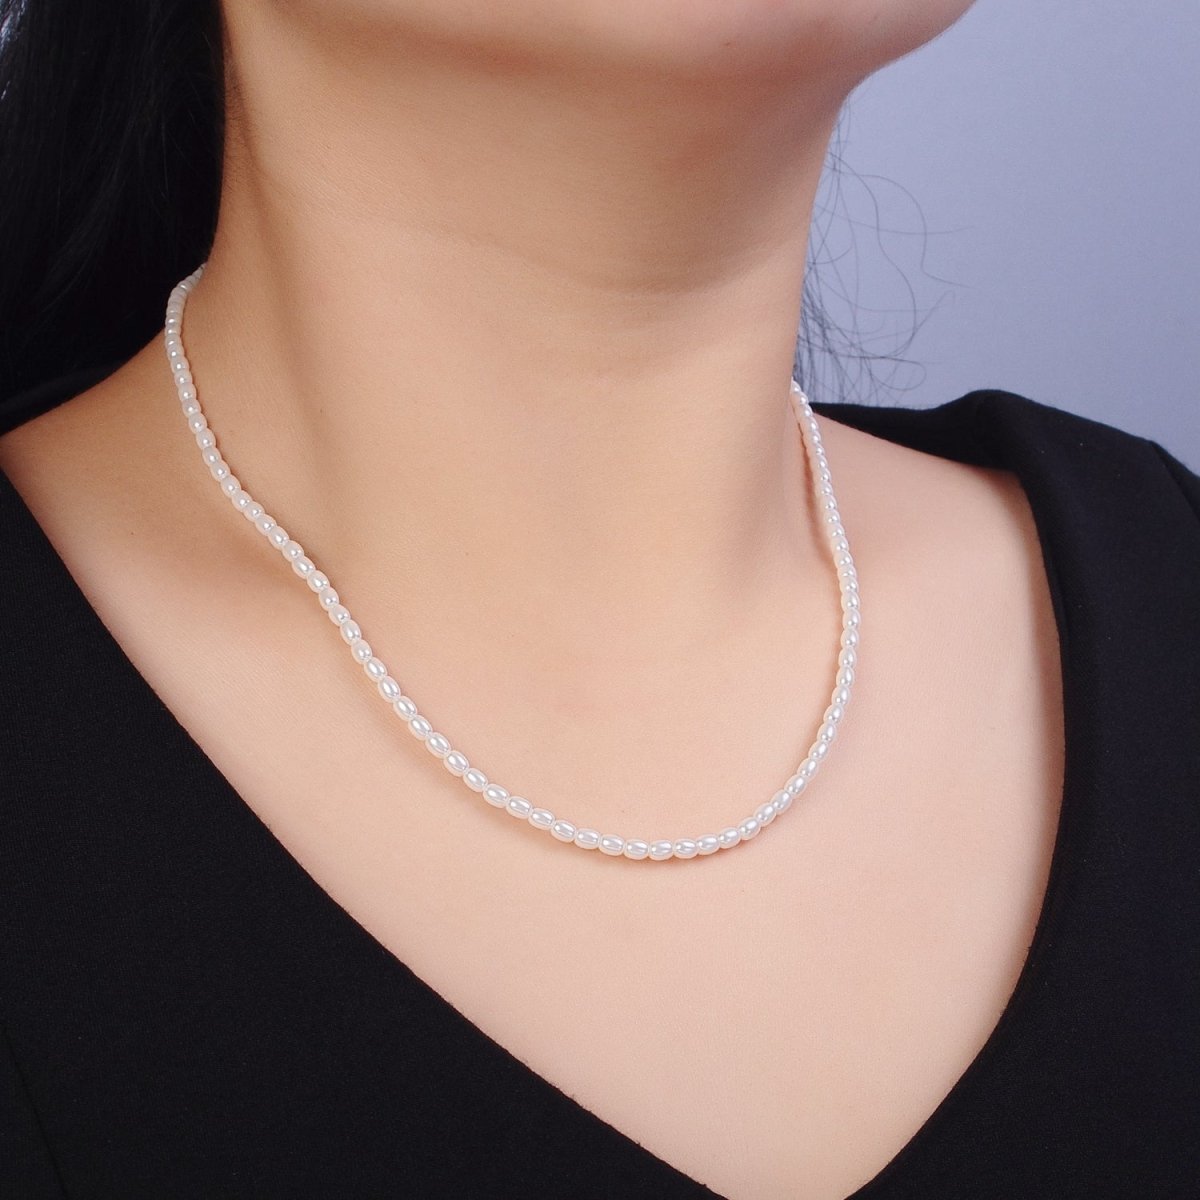 OS 24K Gold Filled Pearl Necklace Freshwater Pearl Necklace Handmade 3mm Classic Minimalist Necklace | WA-1560 Clearance Pricing - DLUXCA